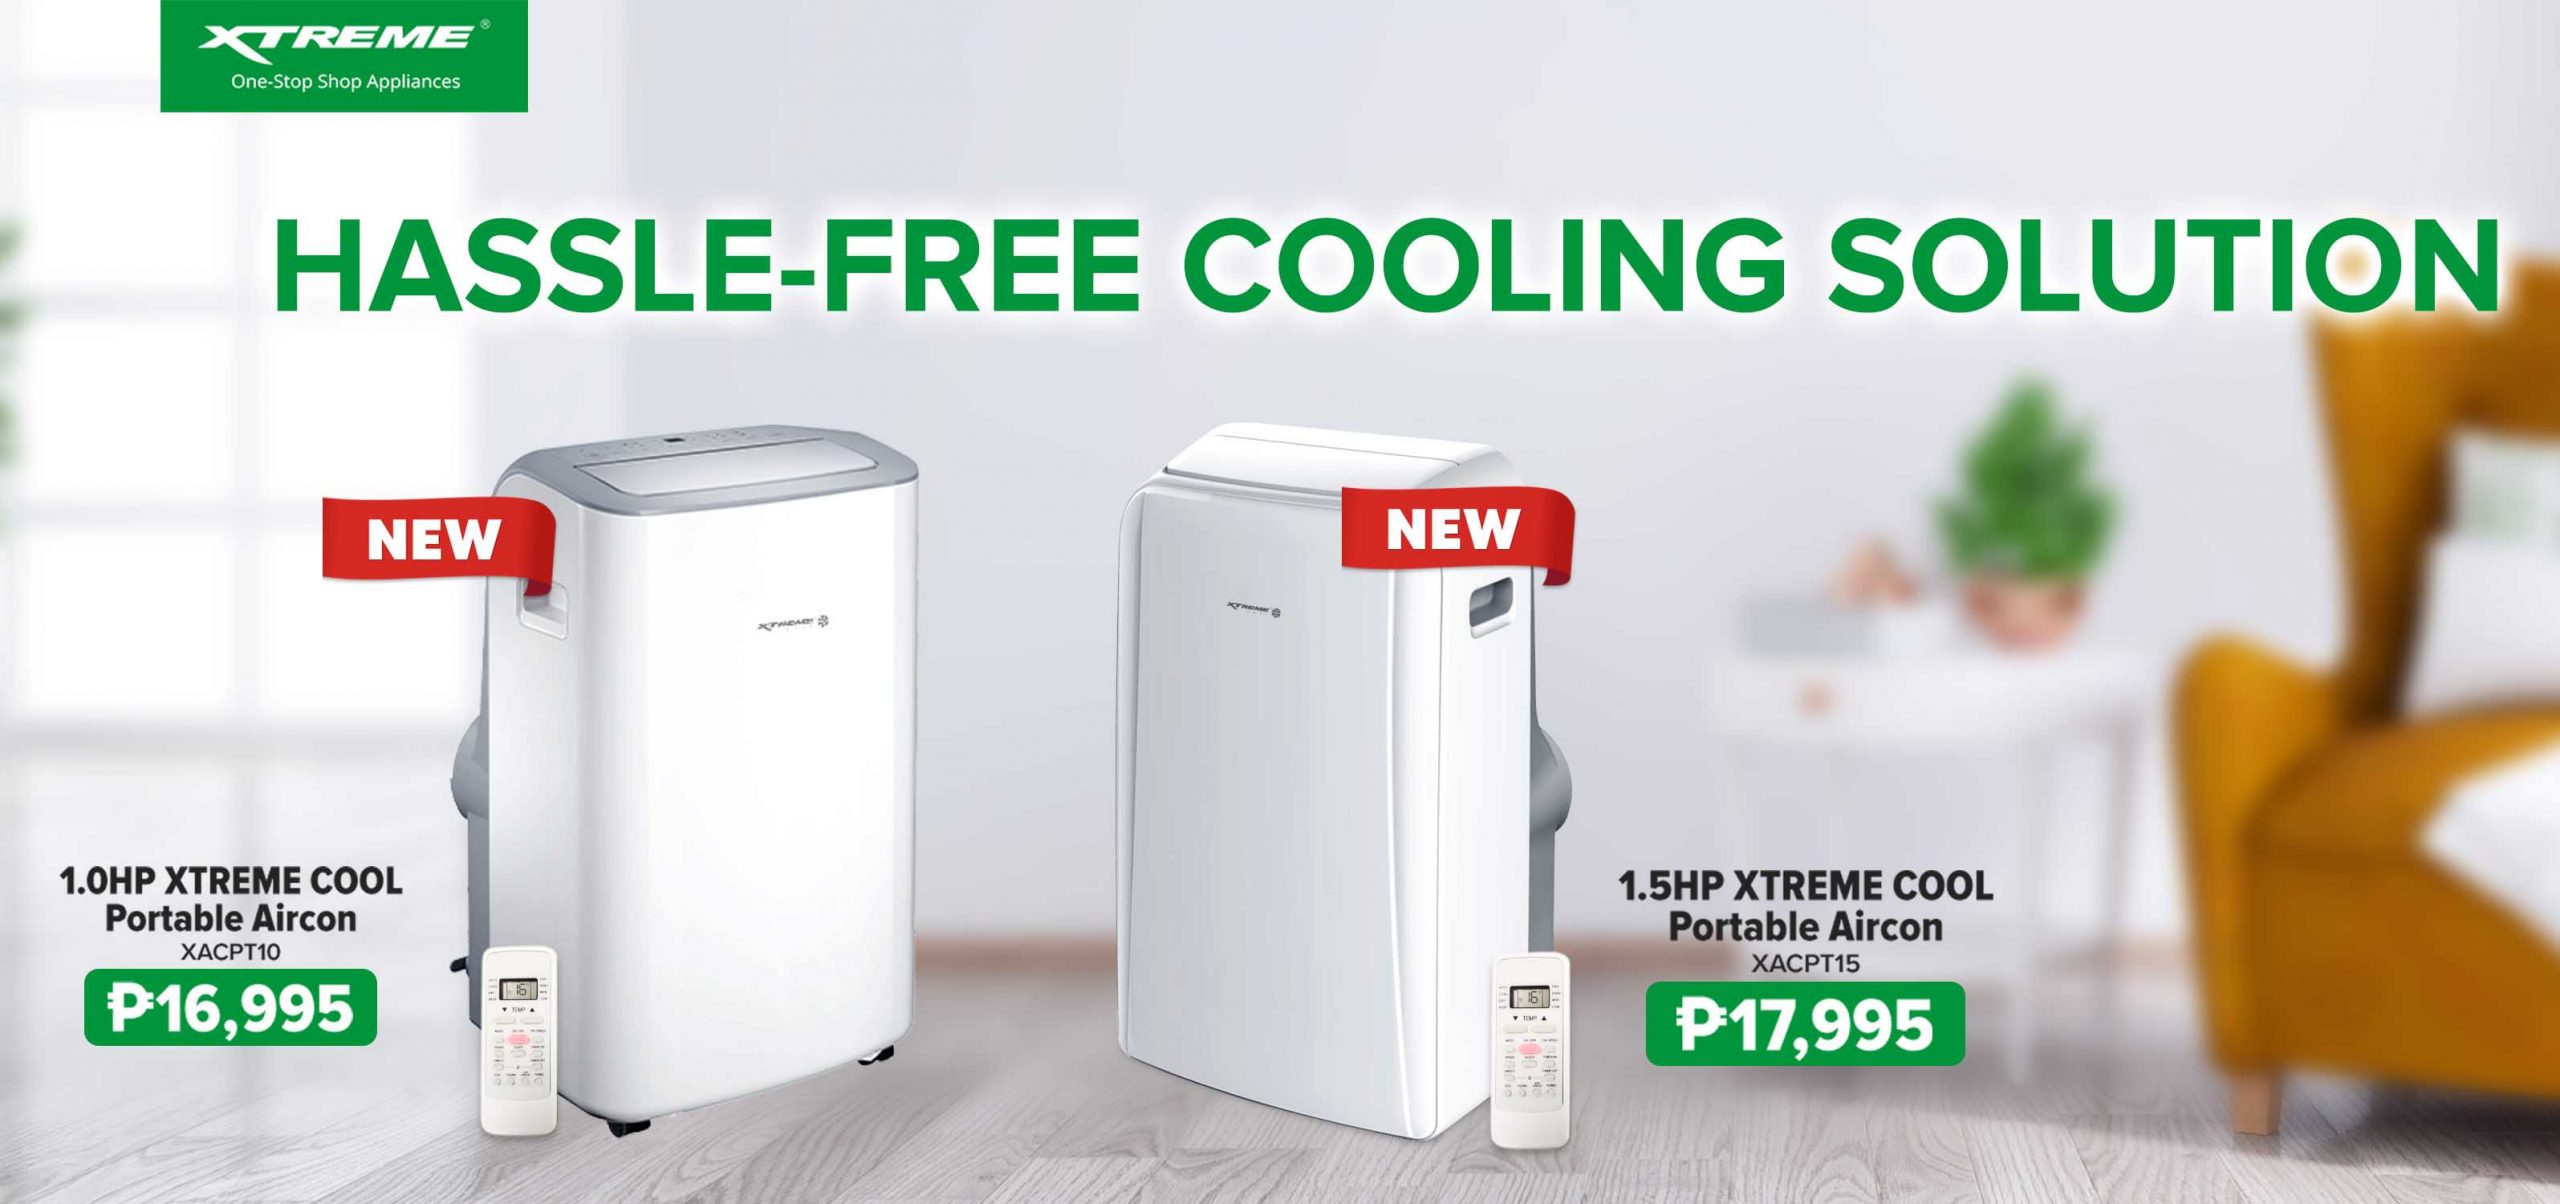 New XTREME Cool Portable Aircon for your home